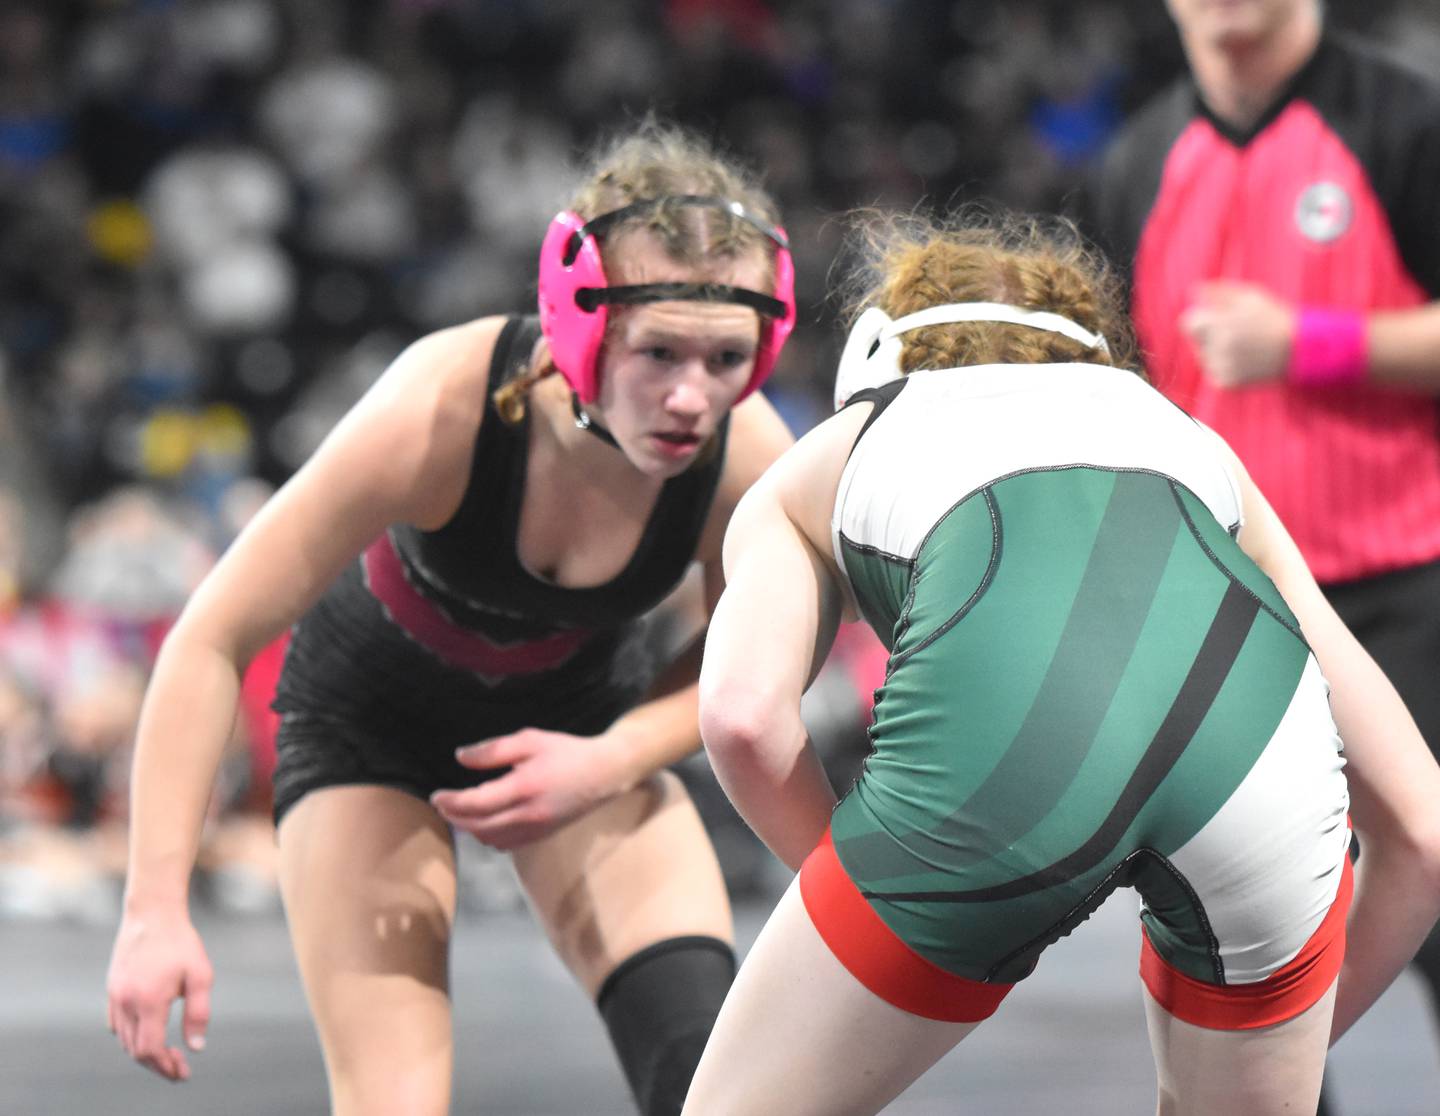 Jazz Chirstensen looks for her next shot in a state wrestling match last week at Xtreme Arena in Coralville.